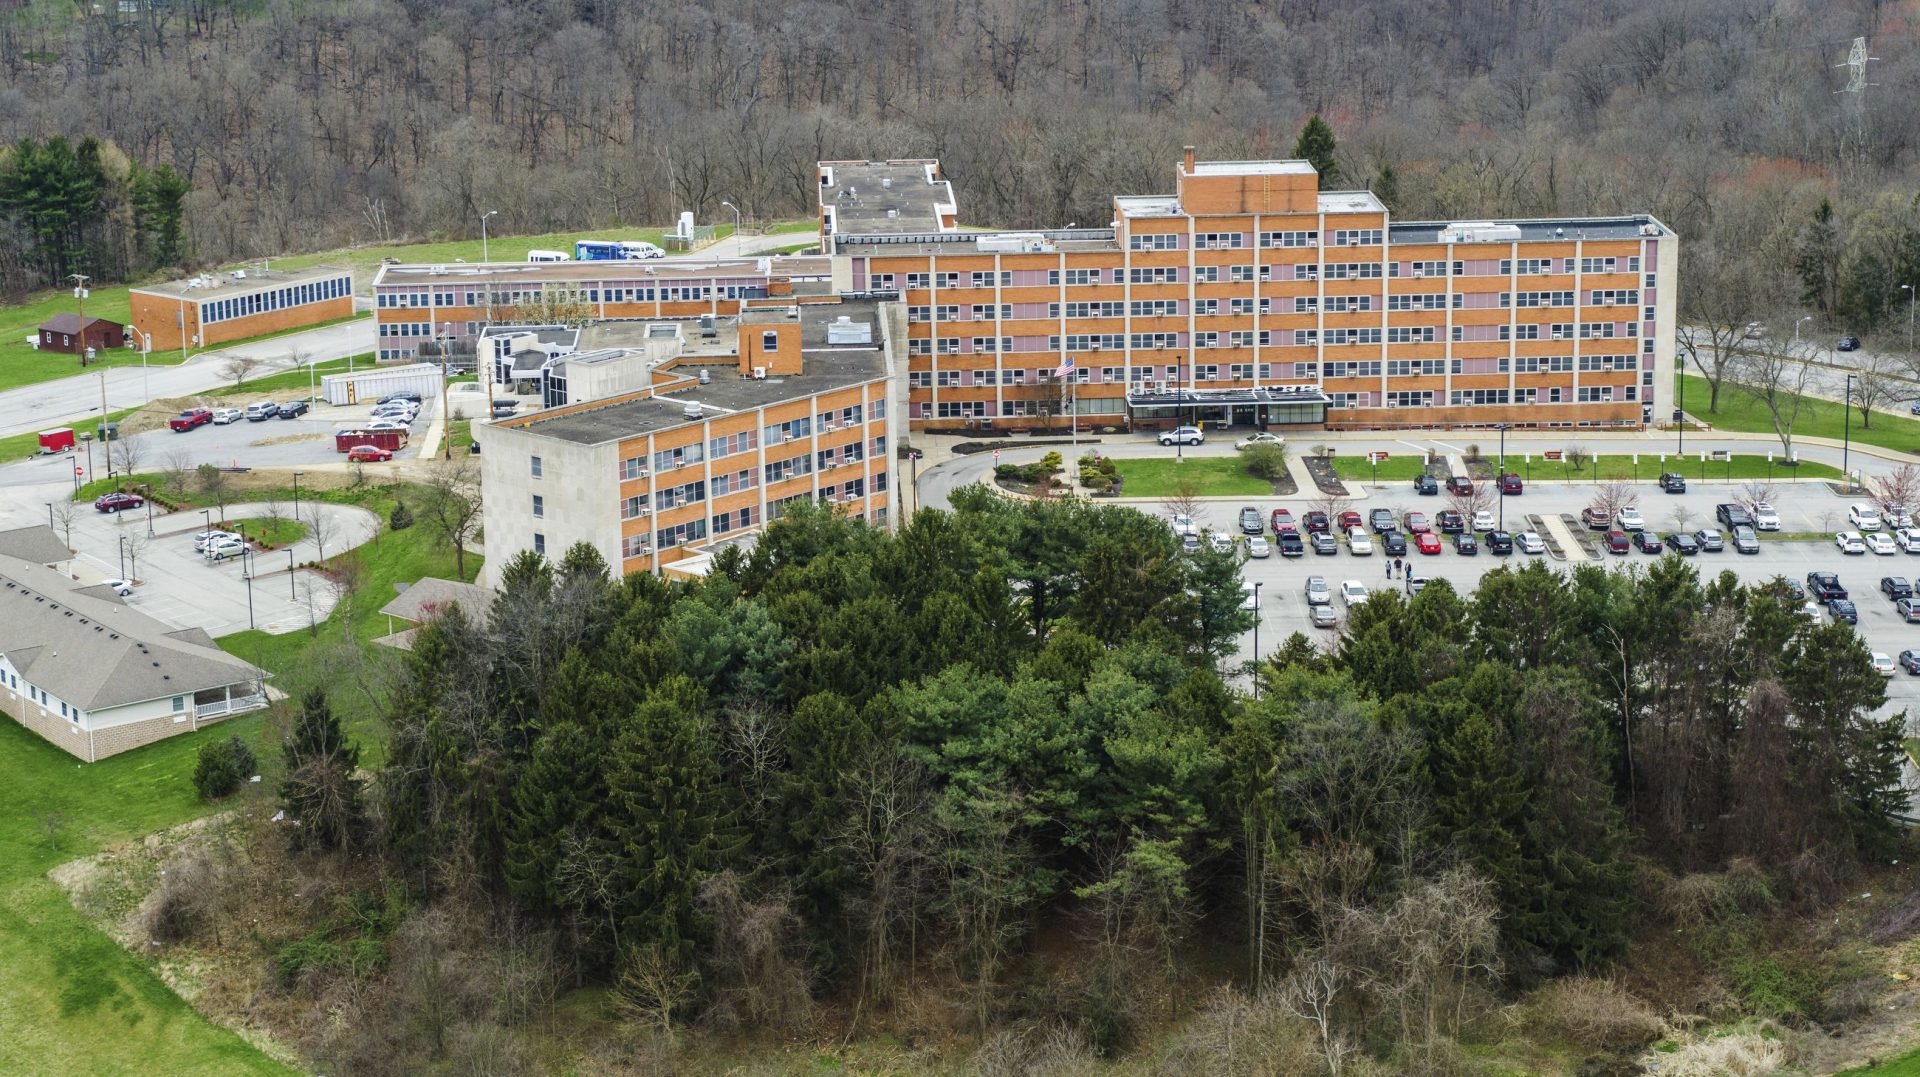 At Brighton Rehabilitation and Wellness Center in Beaver County, which has so far seen 80 deaths — the highest number at any nursing home in Pennsylvania to date — an “abbreviated” state survey in late April found no deficient practices.